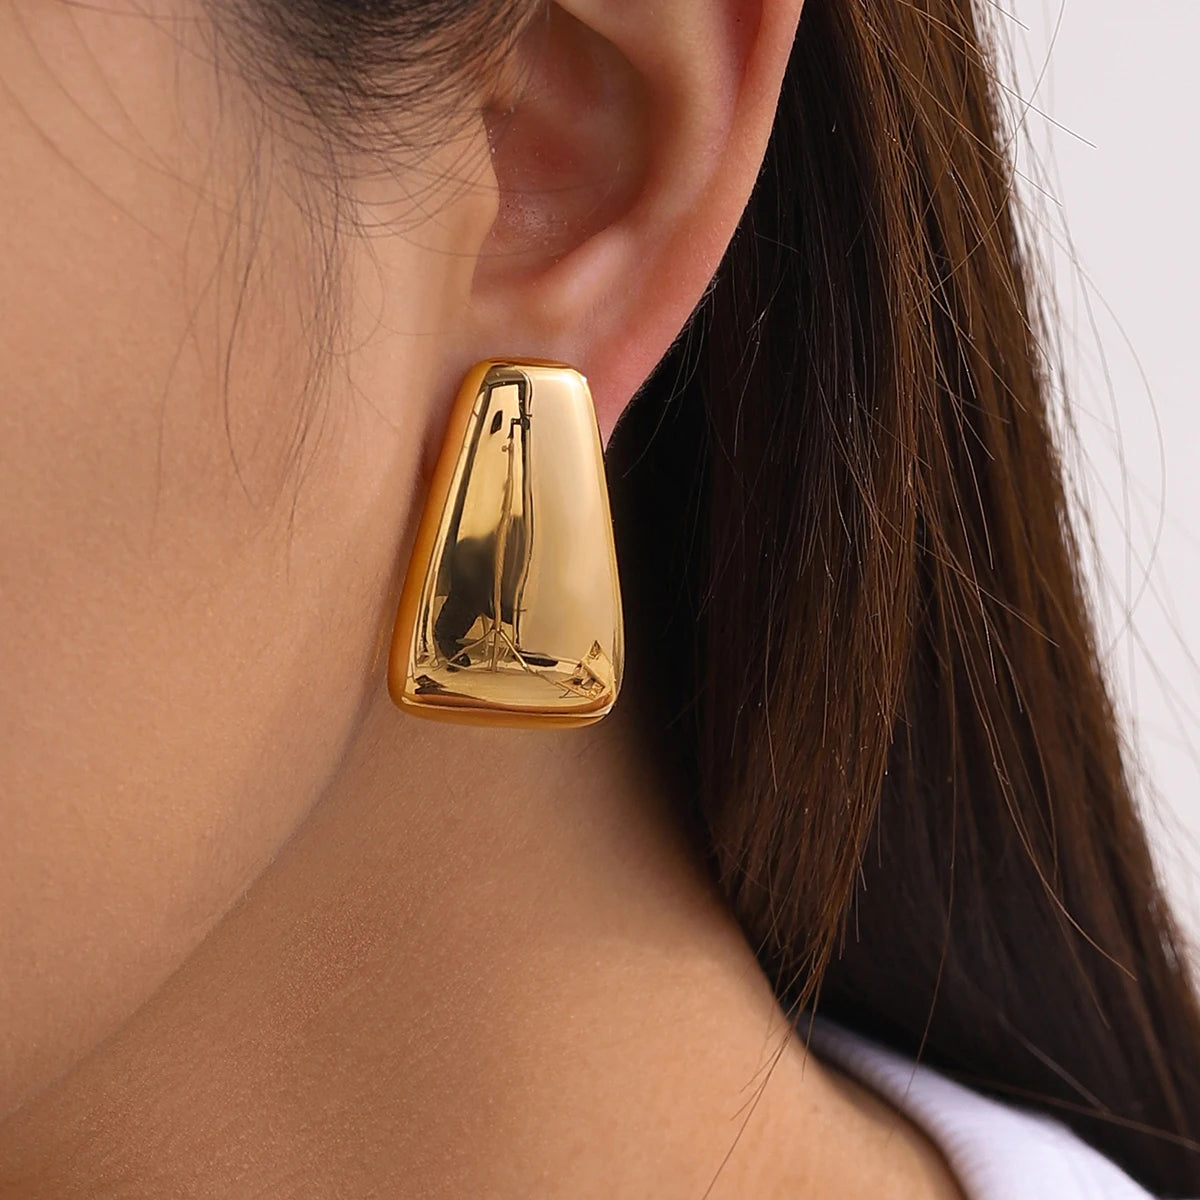 Minimalist Square Stainless Steel Earrings 18K Gold Plated